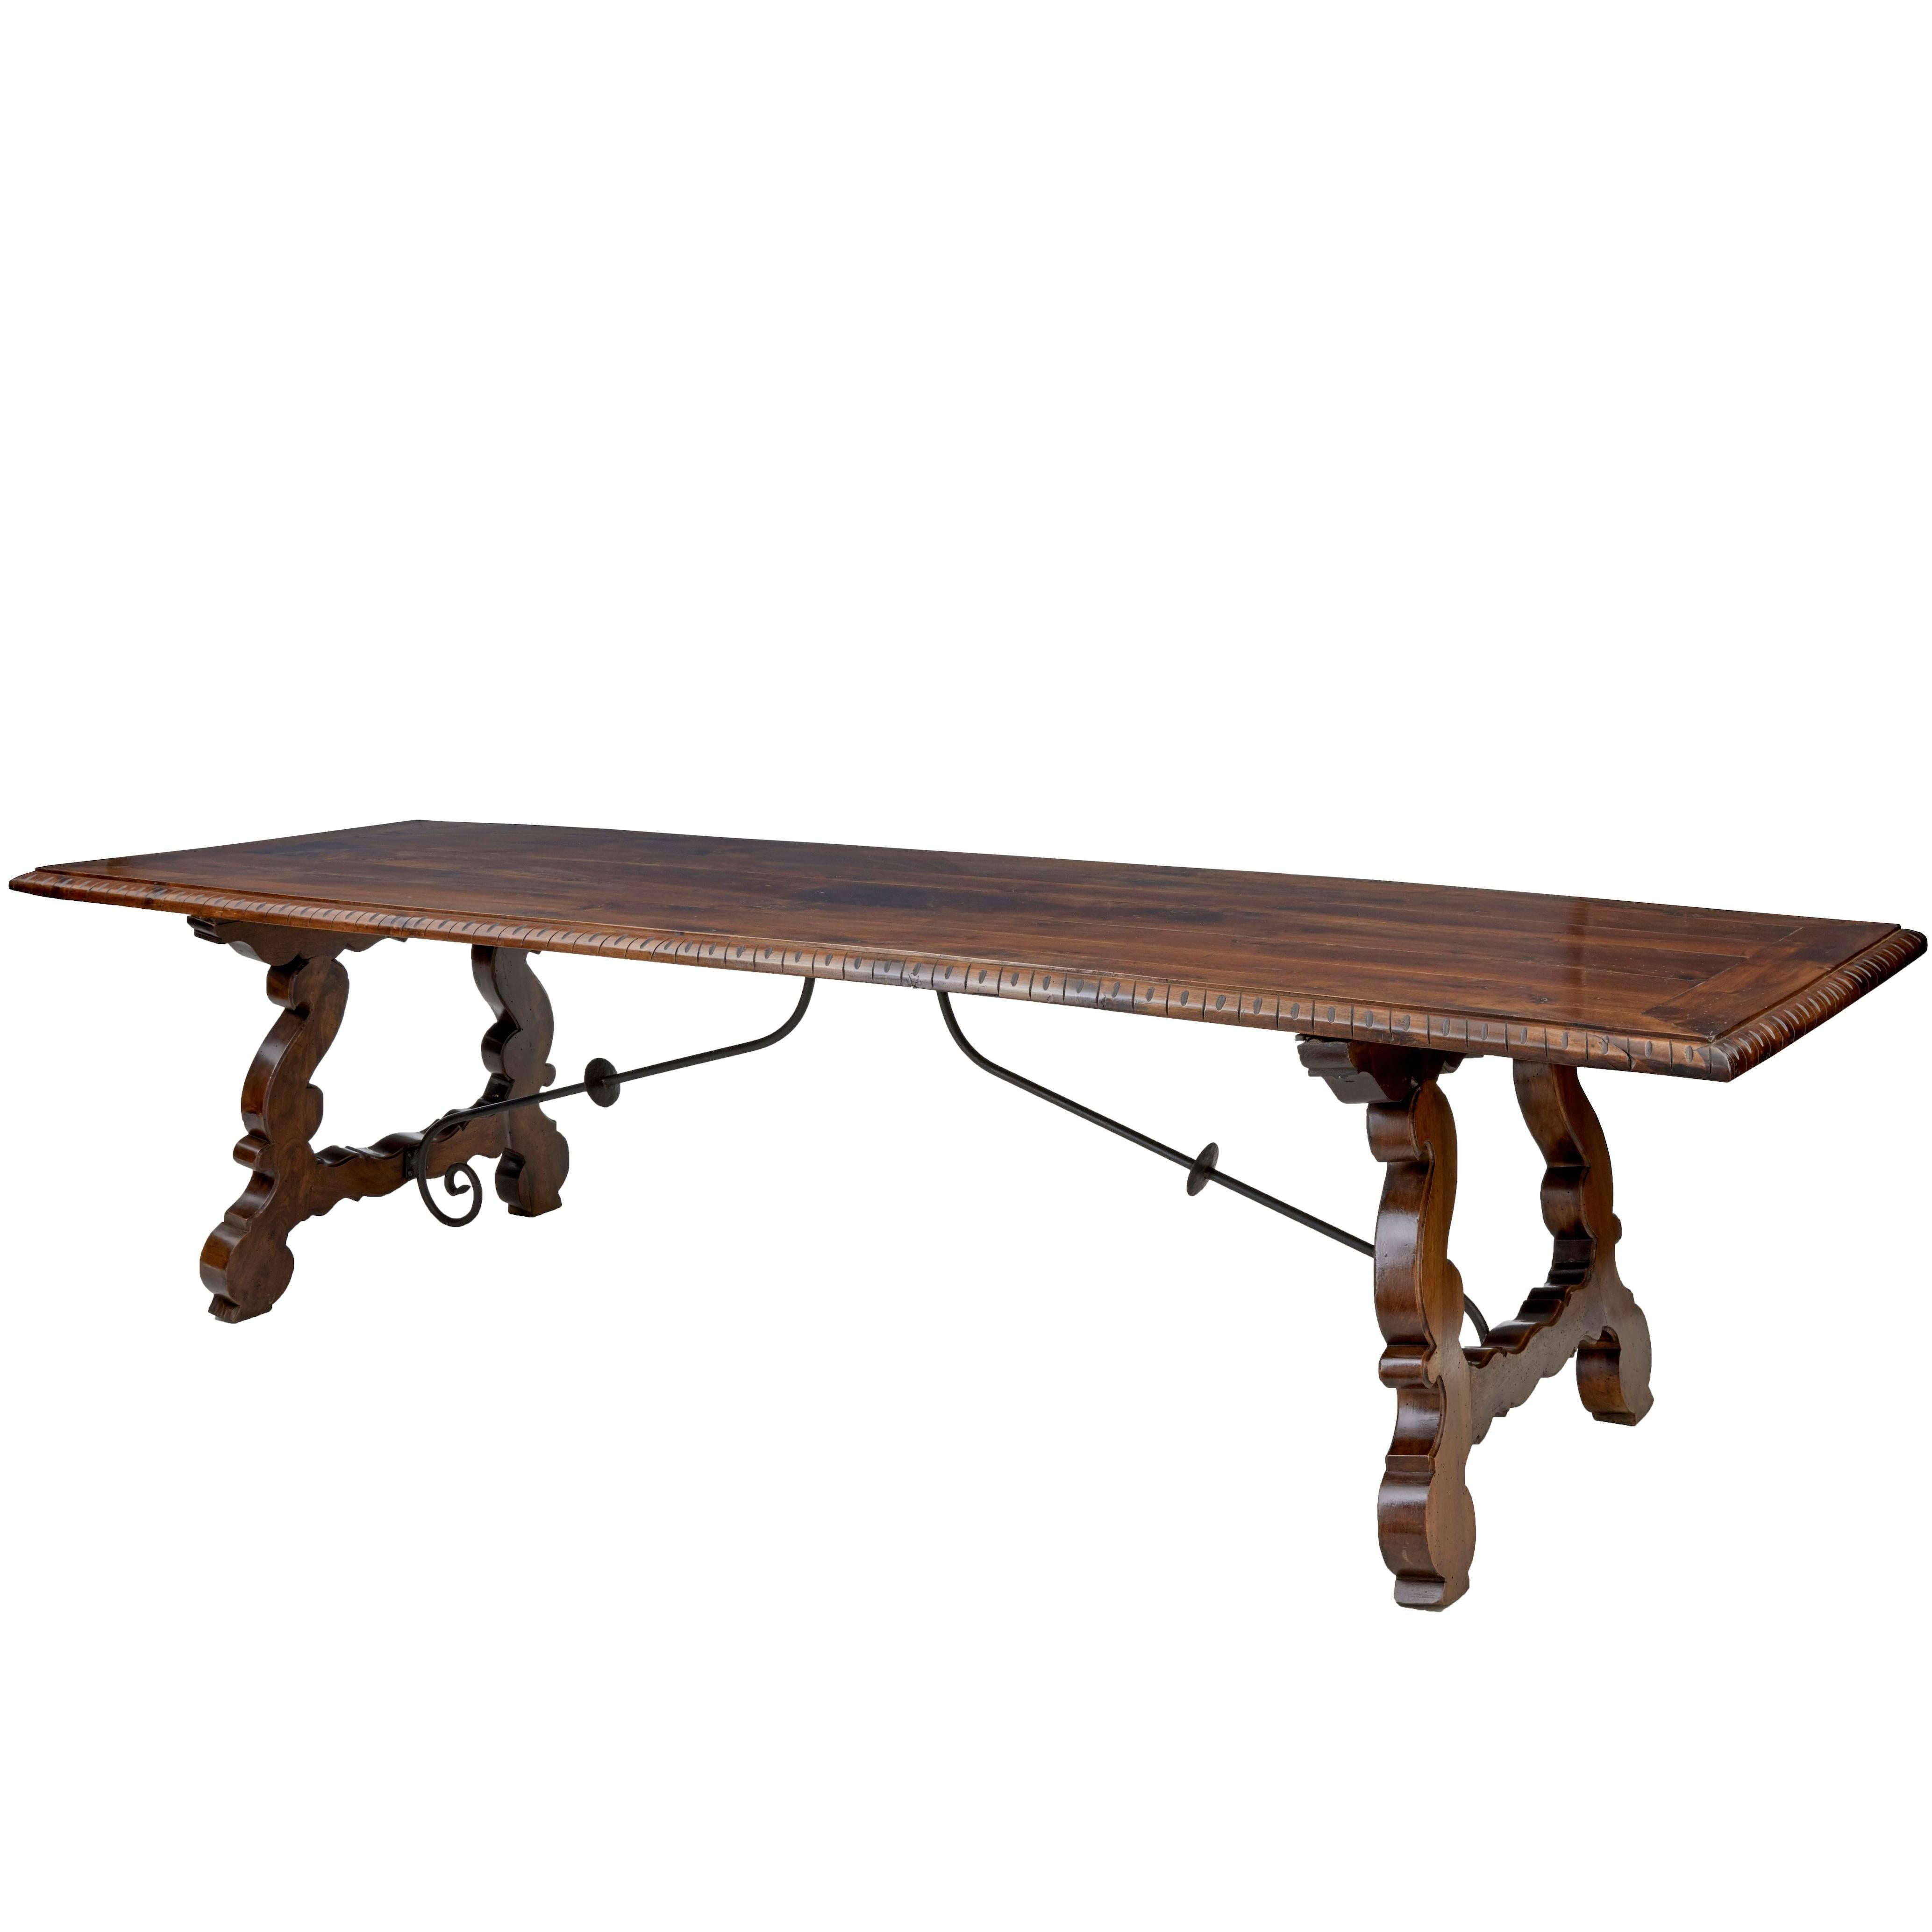 Large 19th Century Spanish Refectory Dining Table